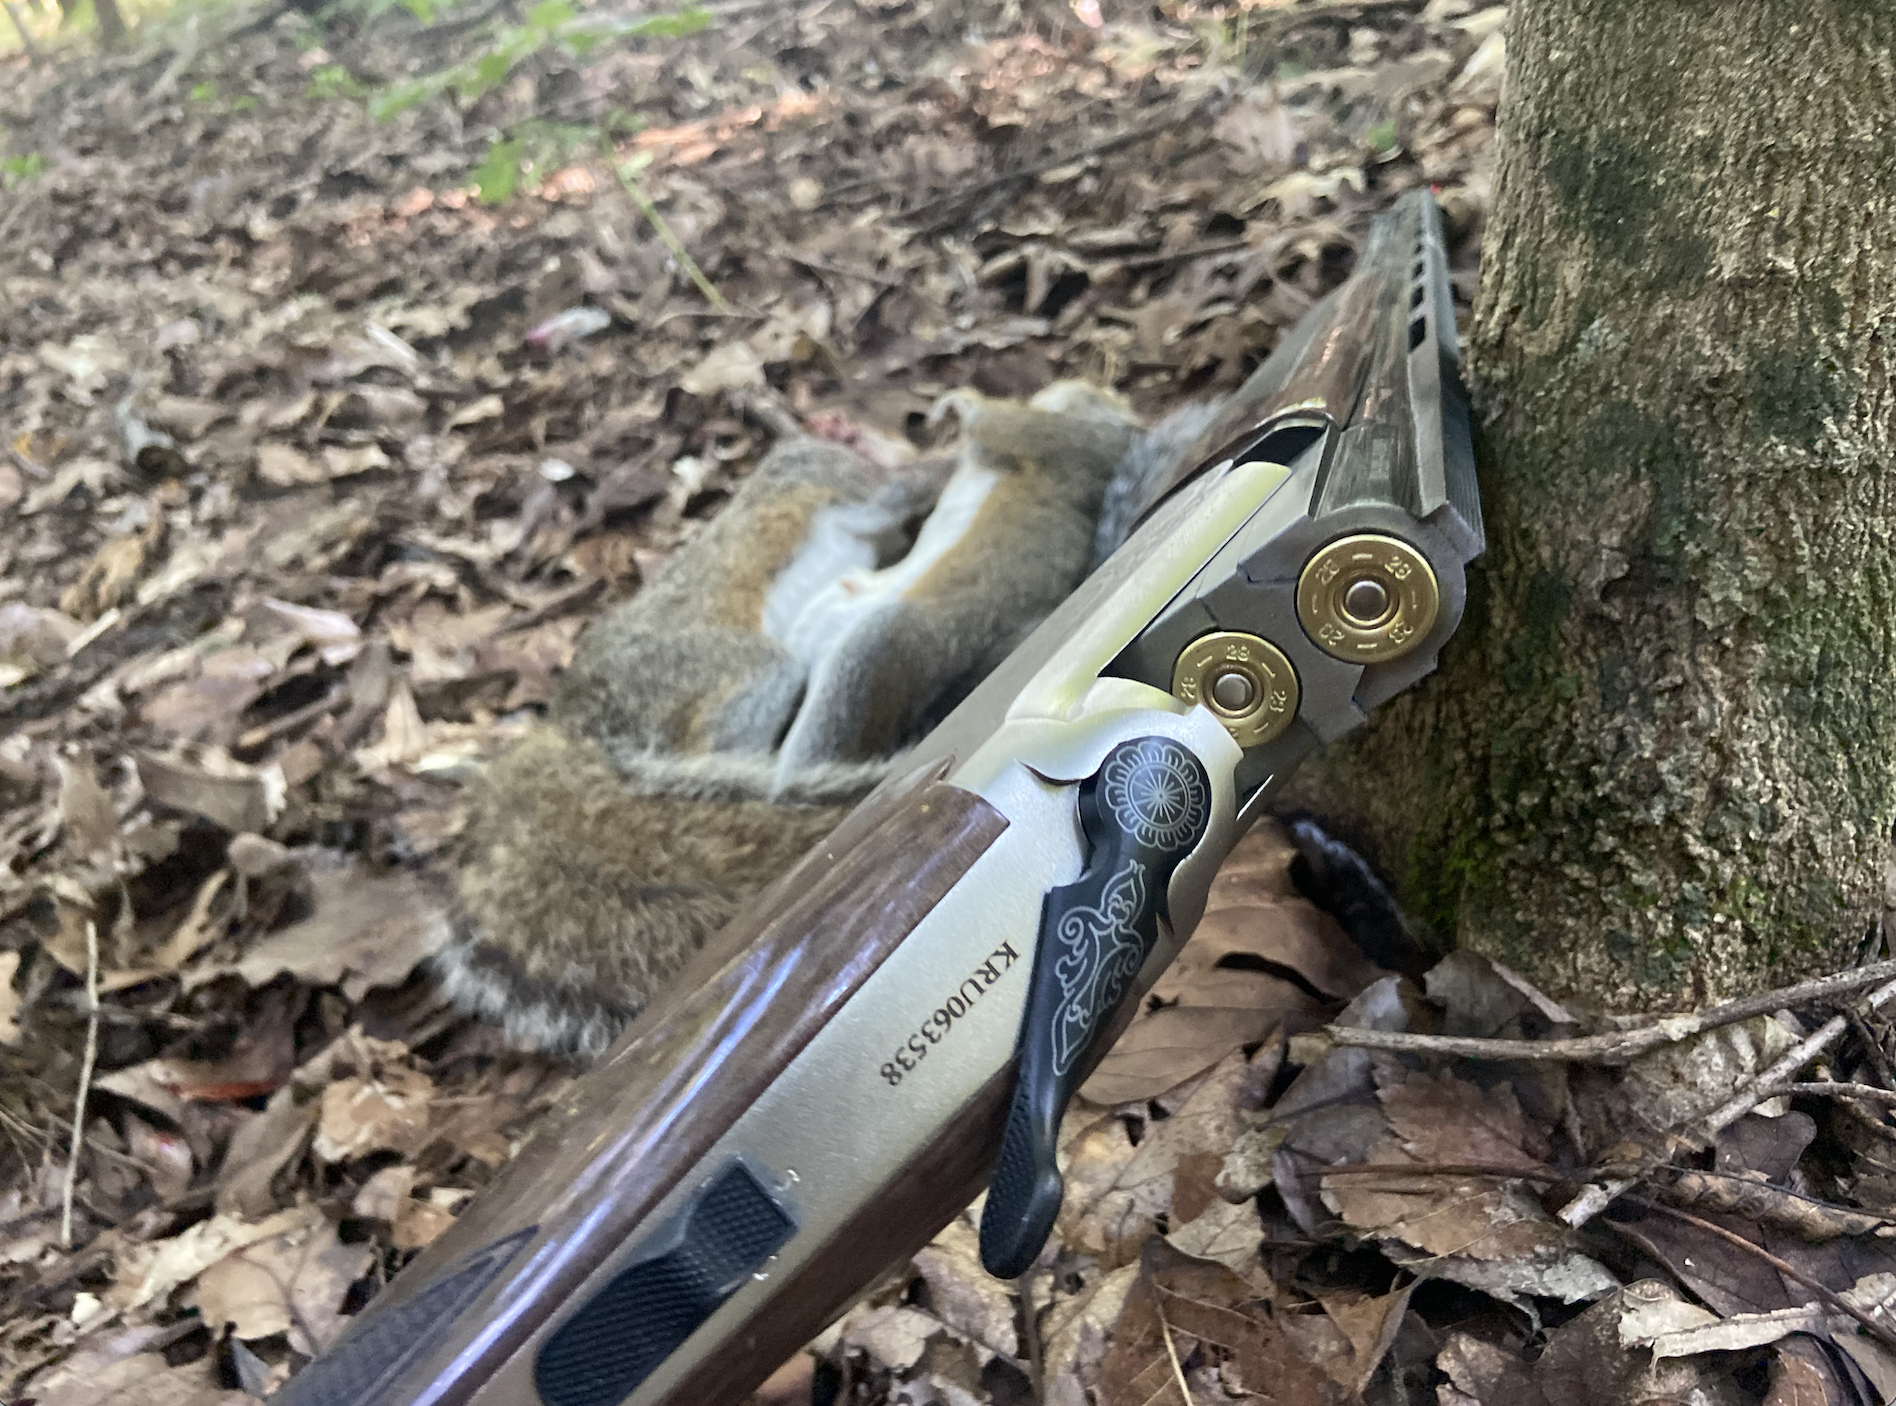 Shotguns are better for squirrel hunting with dogs.